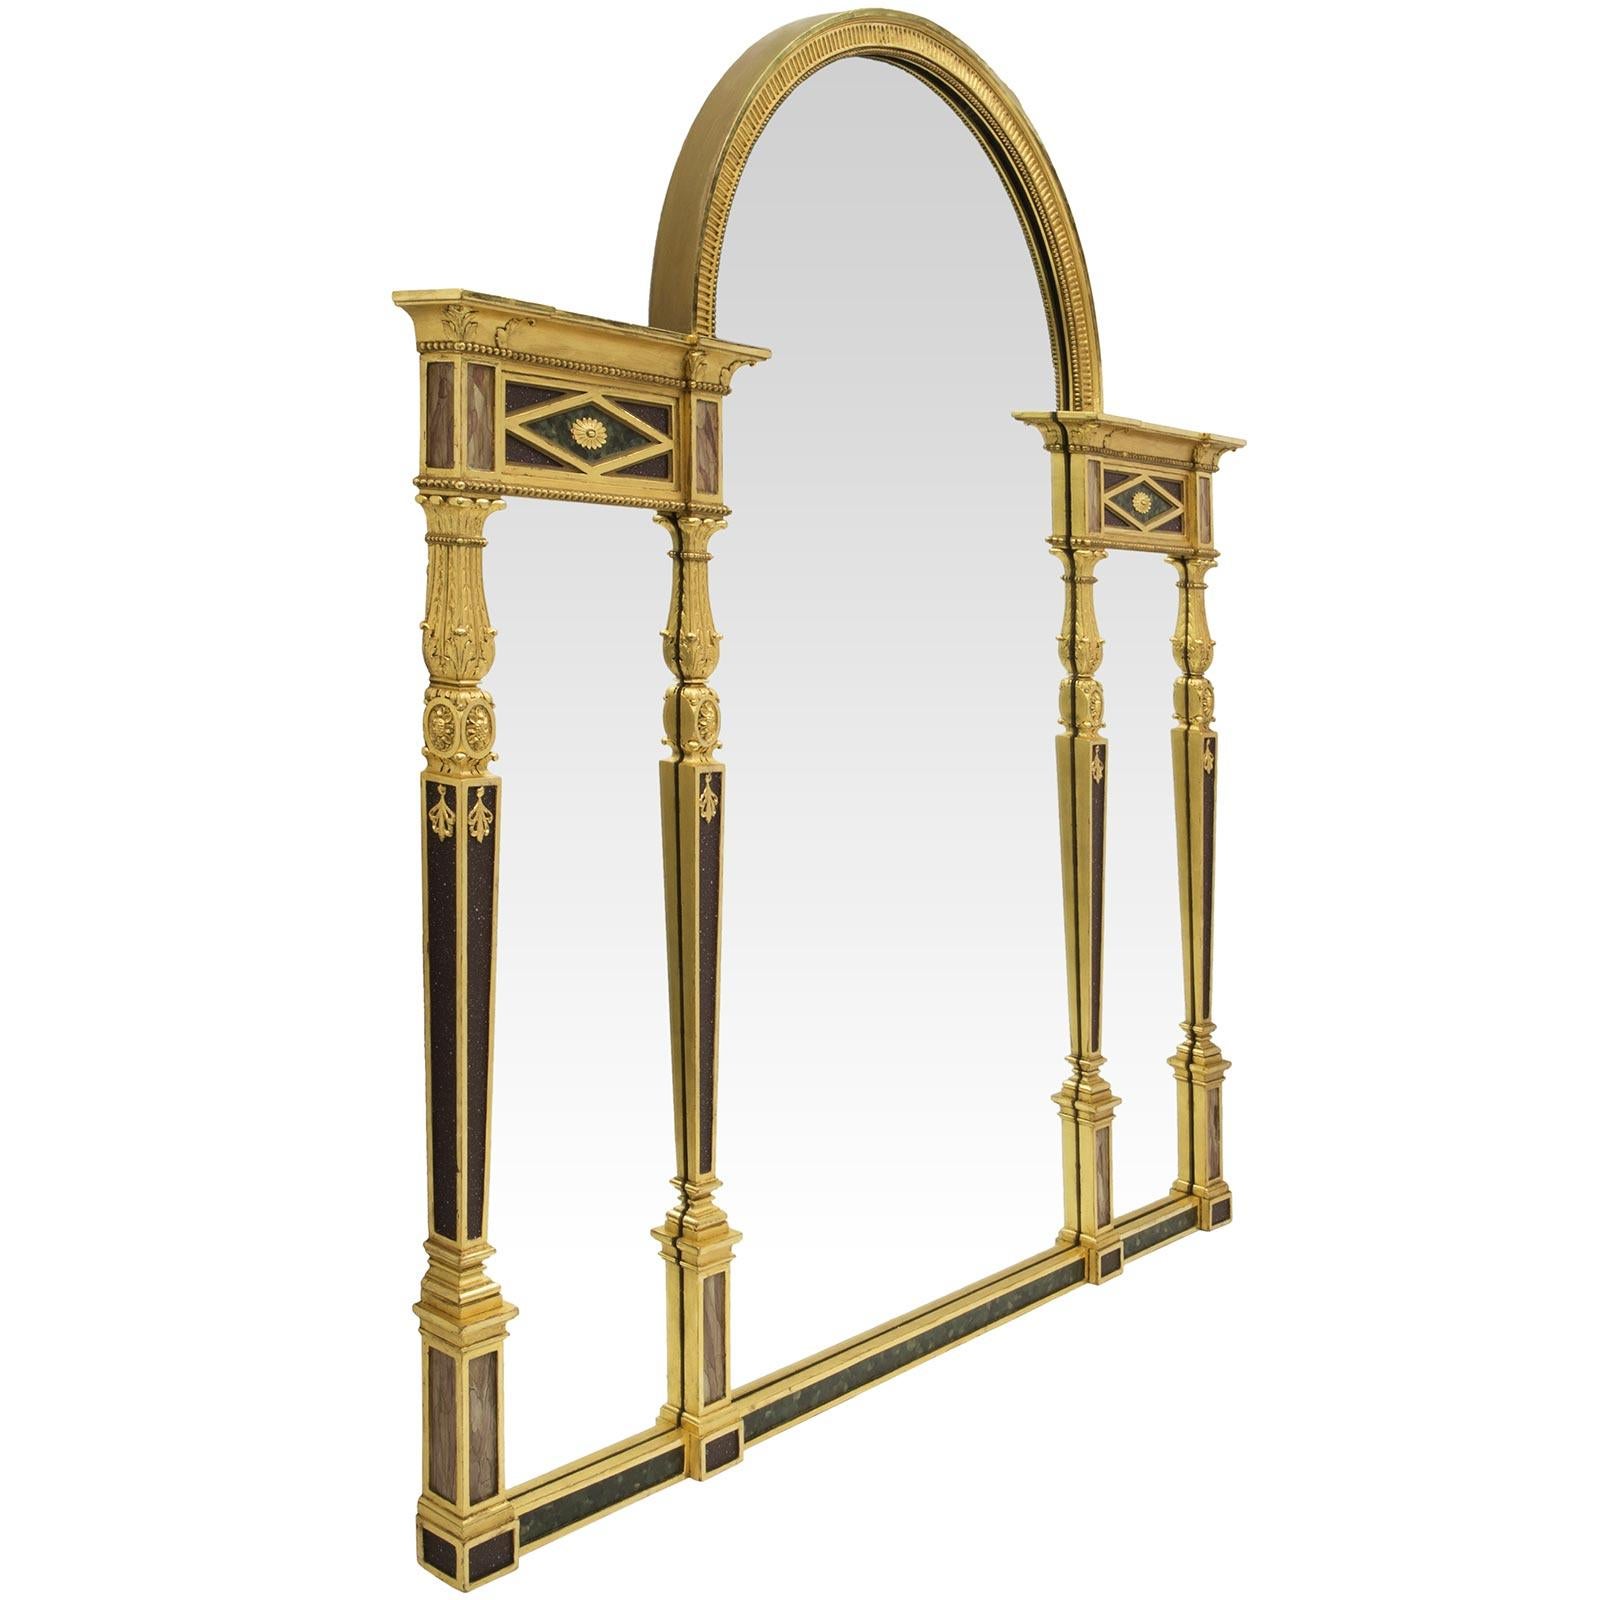 A sensational and unique Continental mid 19th century Neo-Classical st. painted and gilt, three panel mirror. The giltwood frame is designed with four vertical columns separating the three mirror plates. The tapered columns have recessed panels with